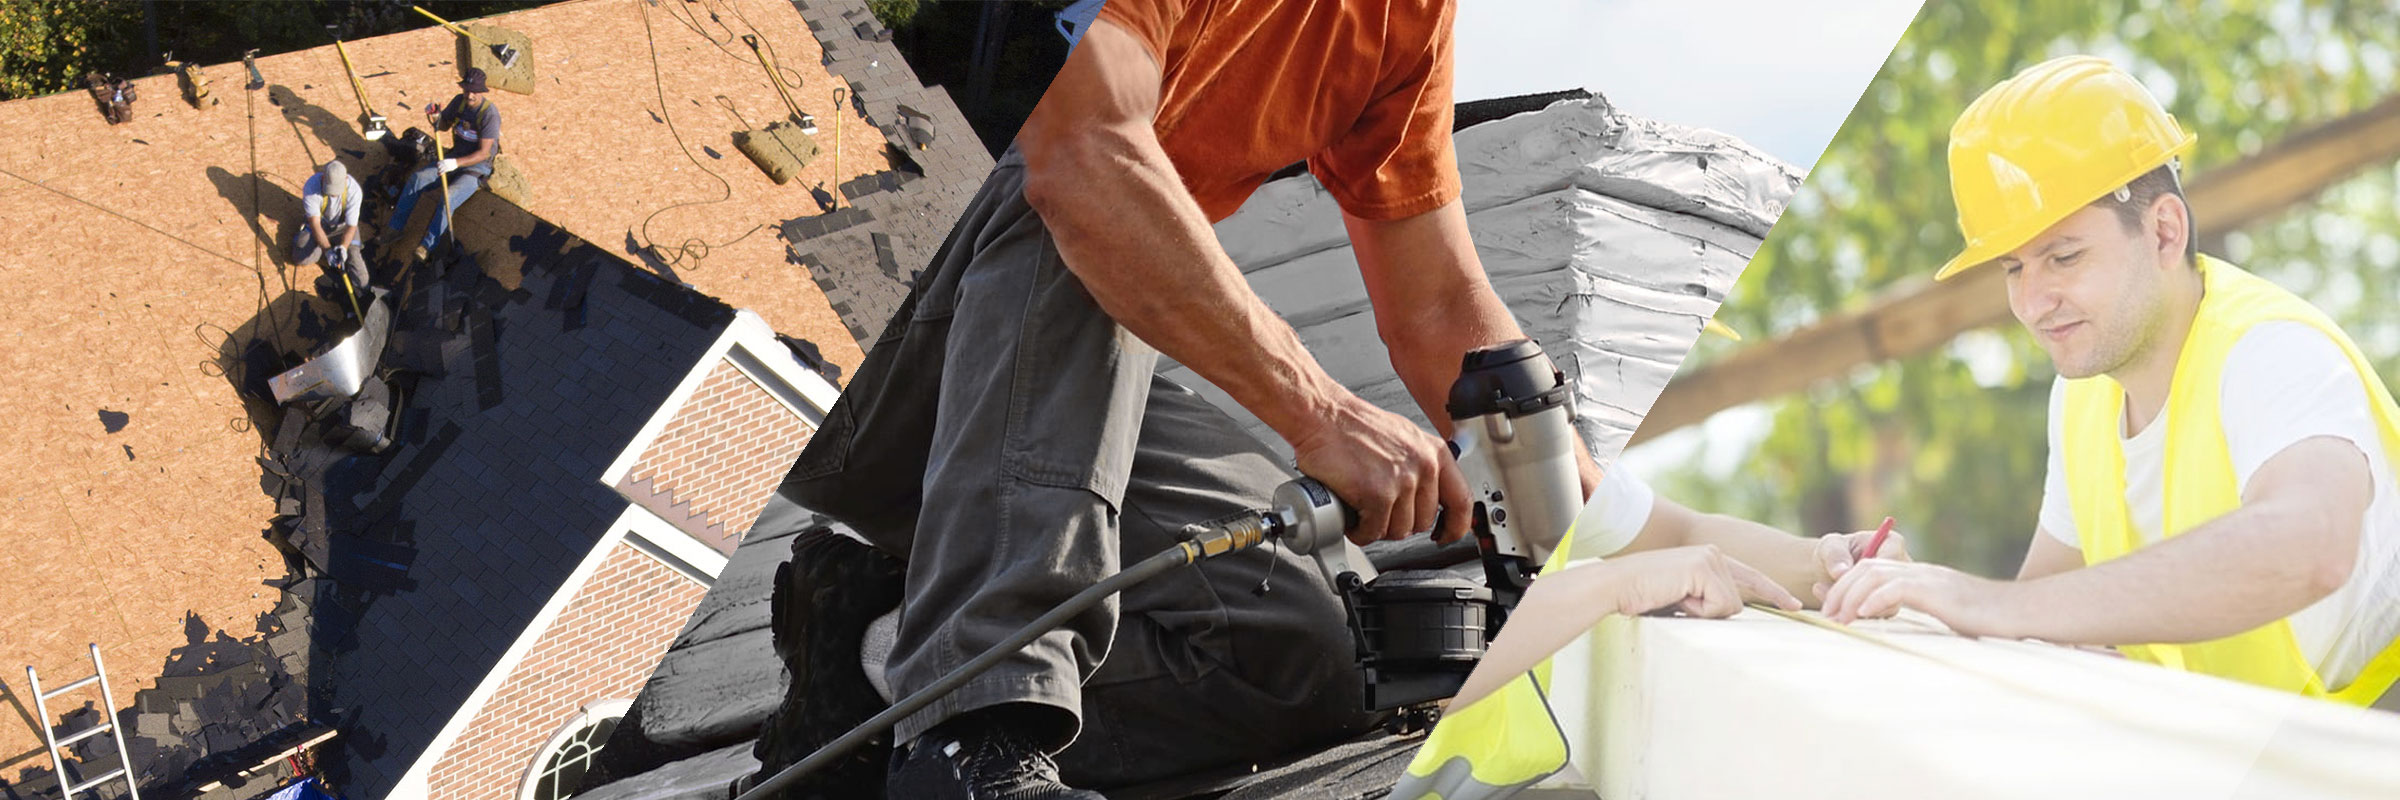 Take Three Key Steps toward a Safer, Sounder Roofing Business